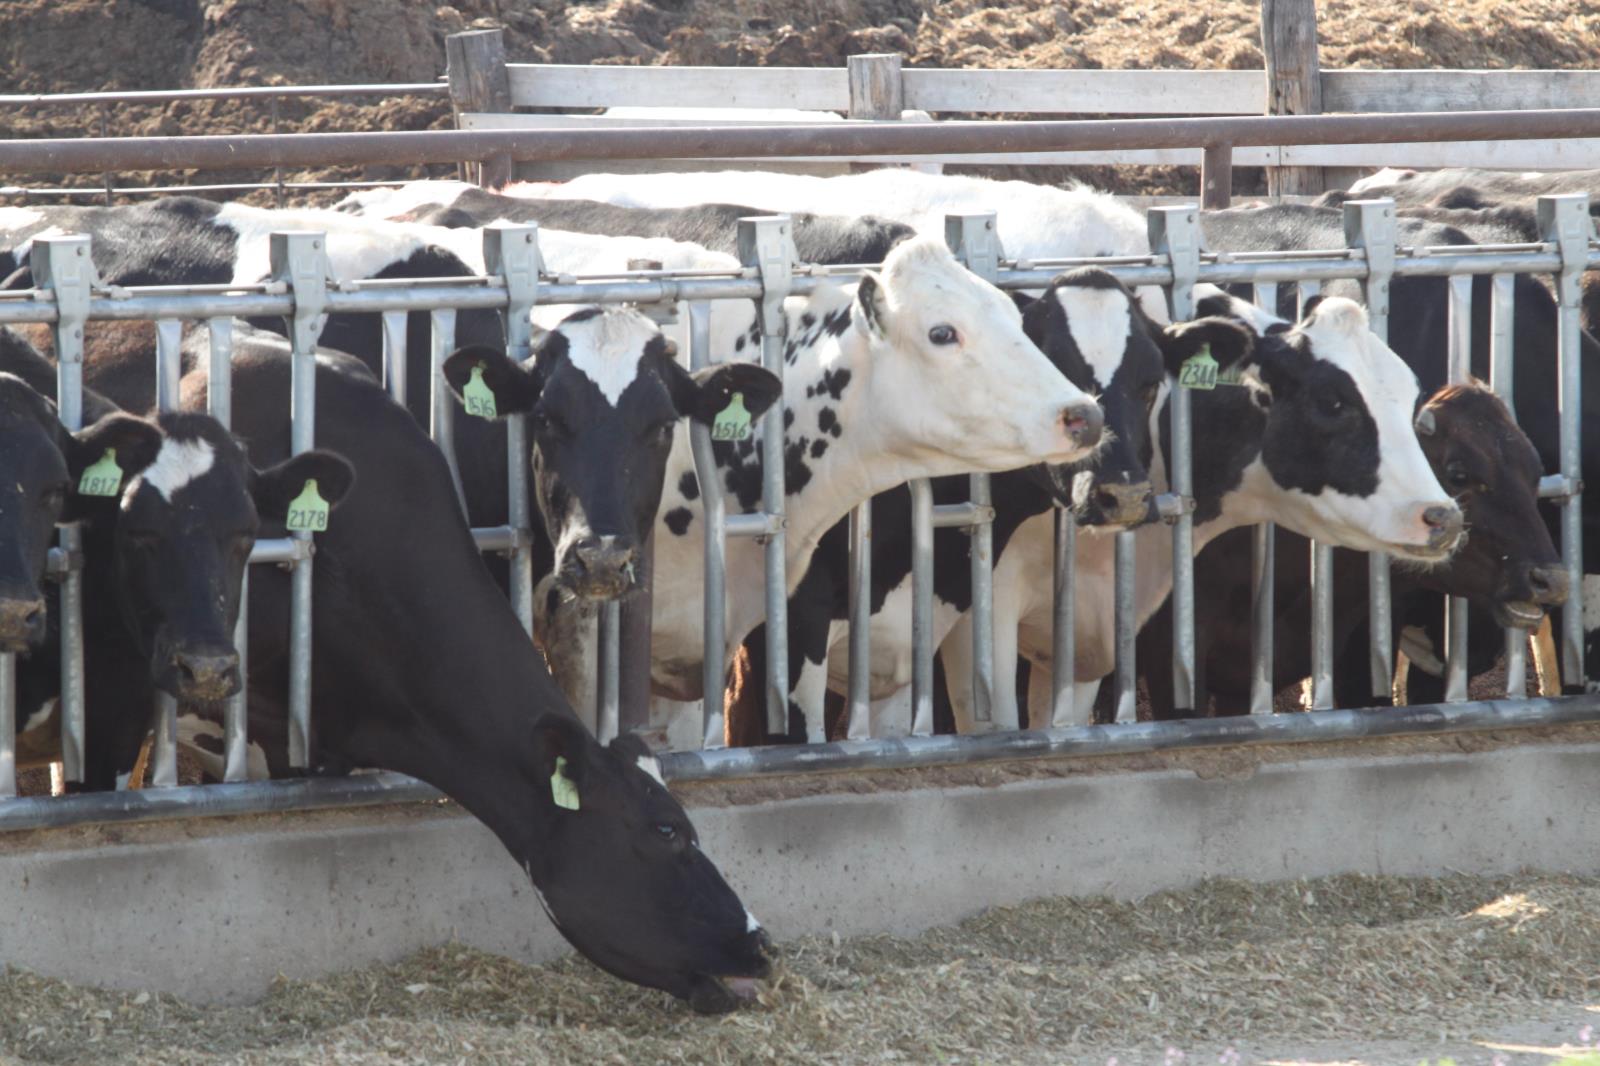 According to a study conducted by University of Idaho researchers, agriculture, led by the dairy industry, has a massive impact on the Magic Valley economy.  